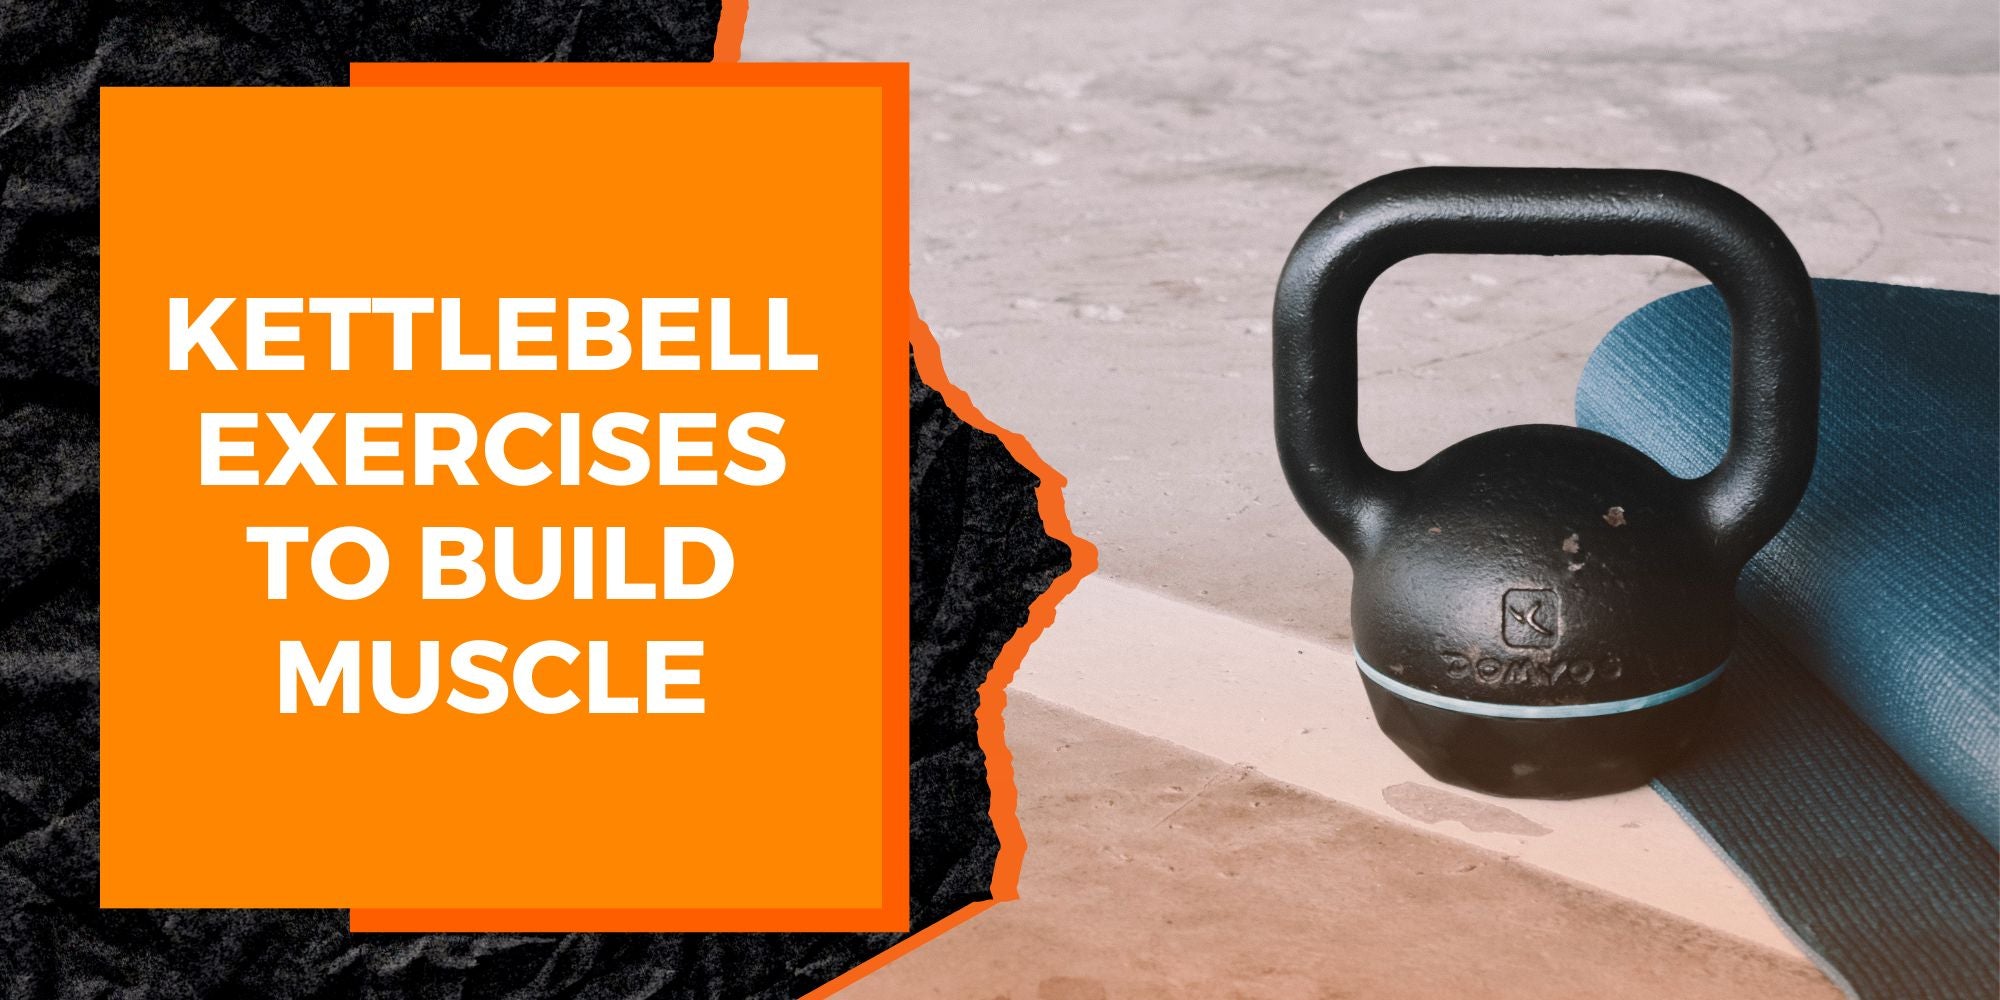 Kettlebell Exercises to Build Muscle